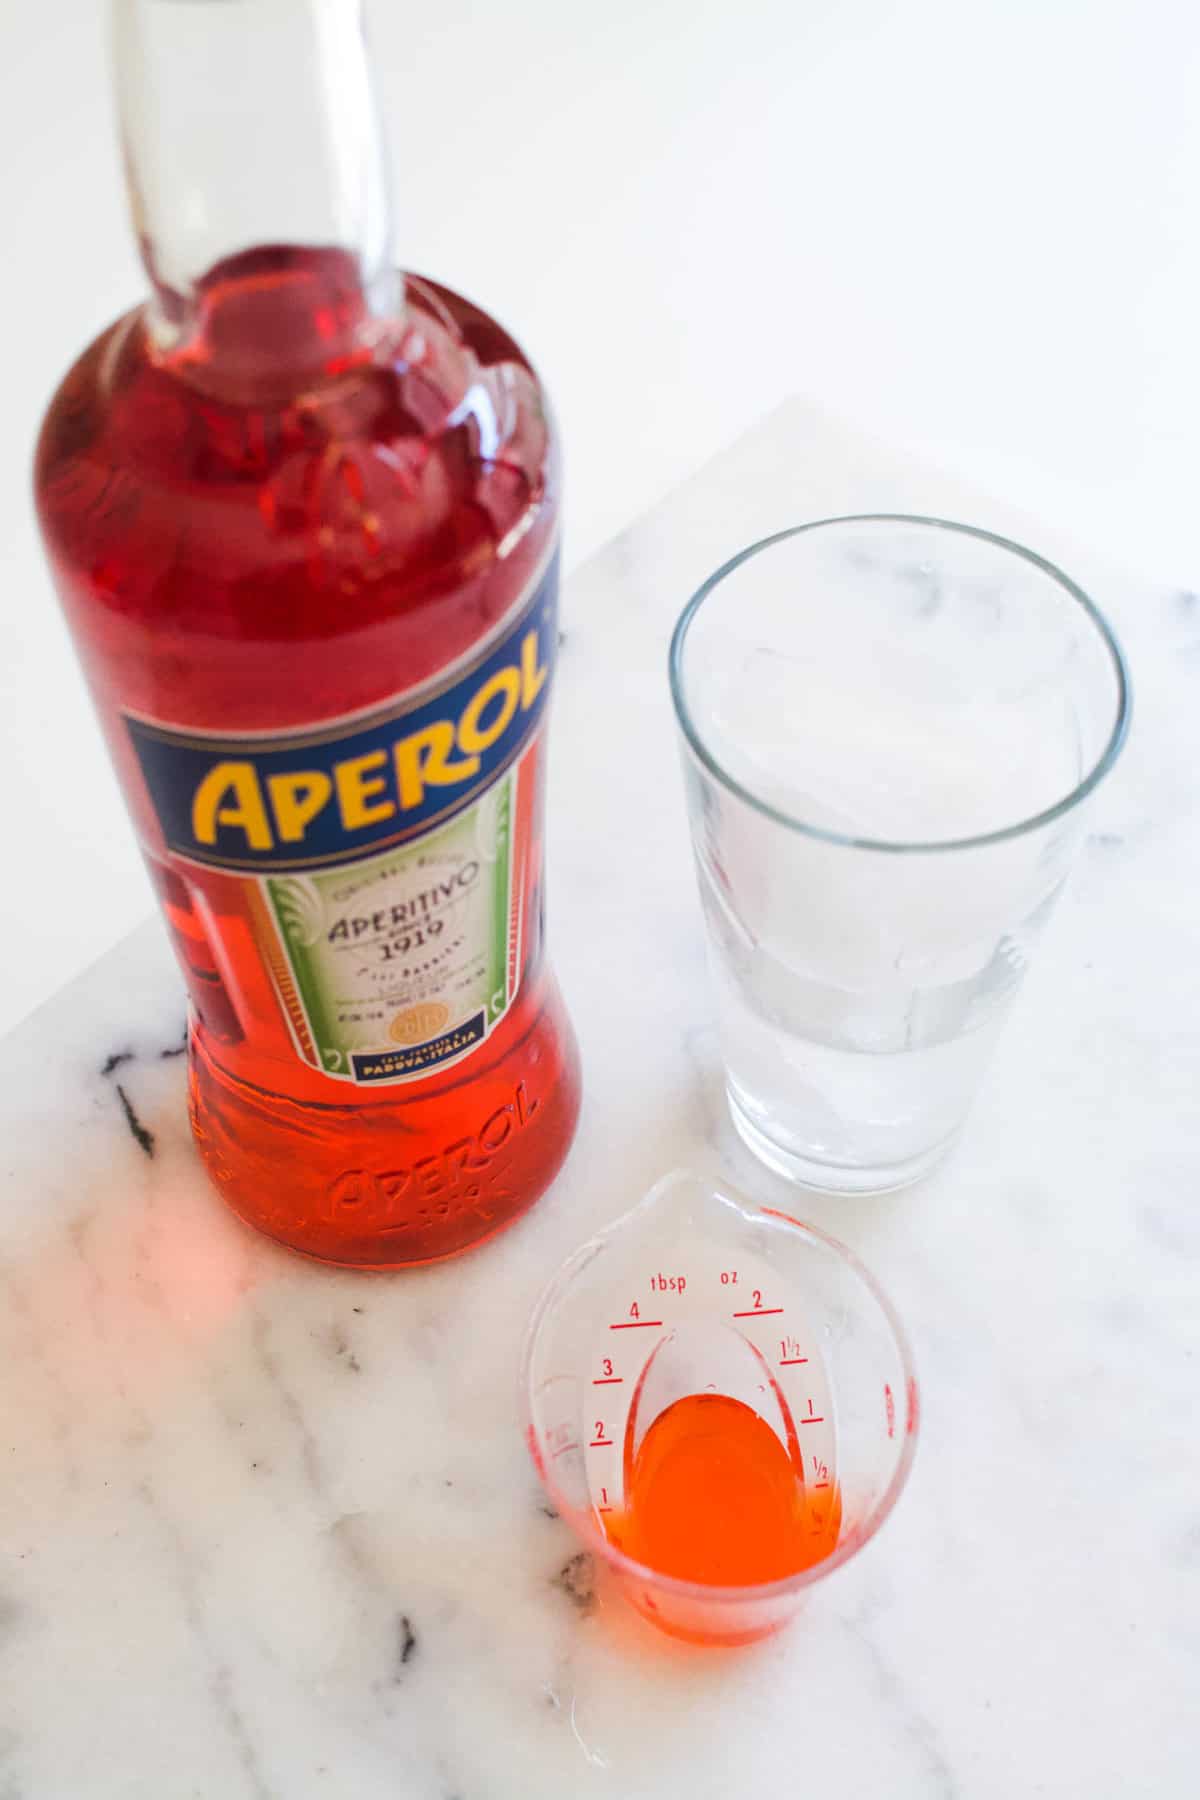 A bottle of Aperol on a table next to a glass of ice and a jigger measuring Aperol.